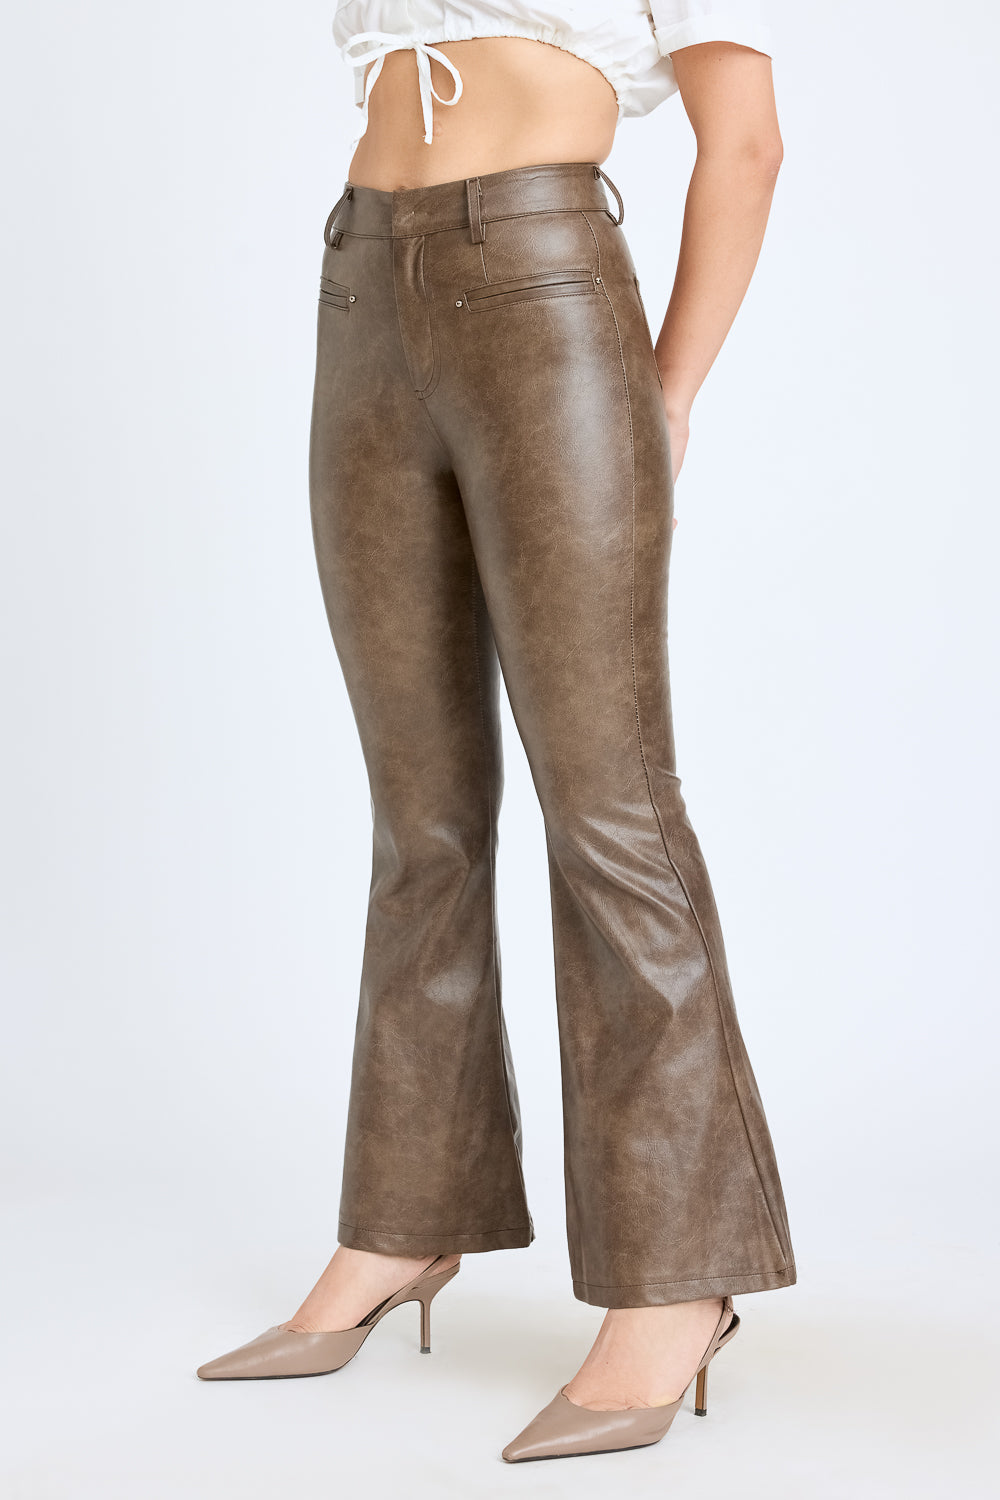 SAND BOOTCUT WIDE TROUSER